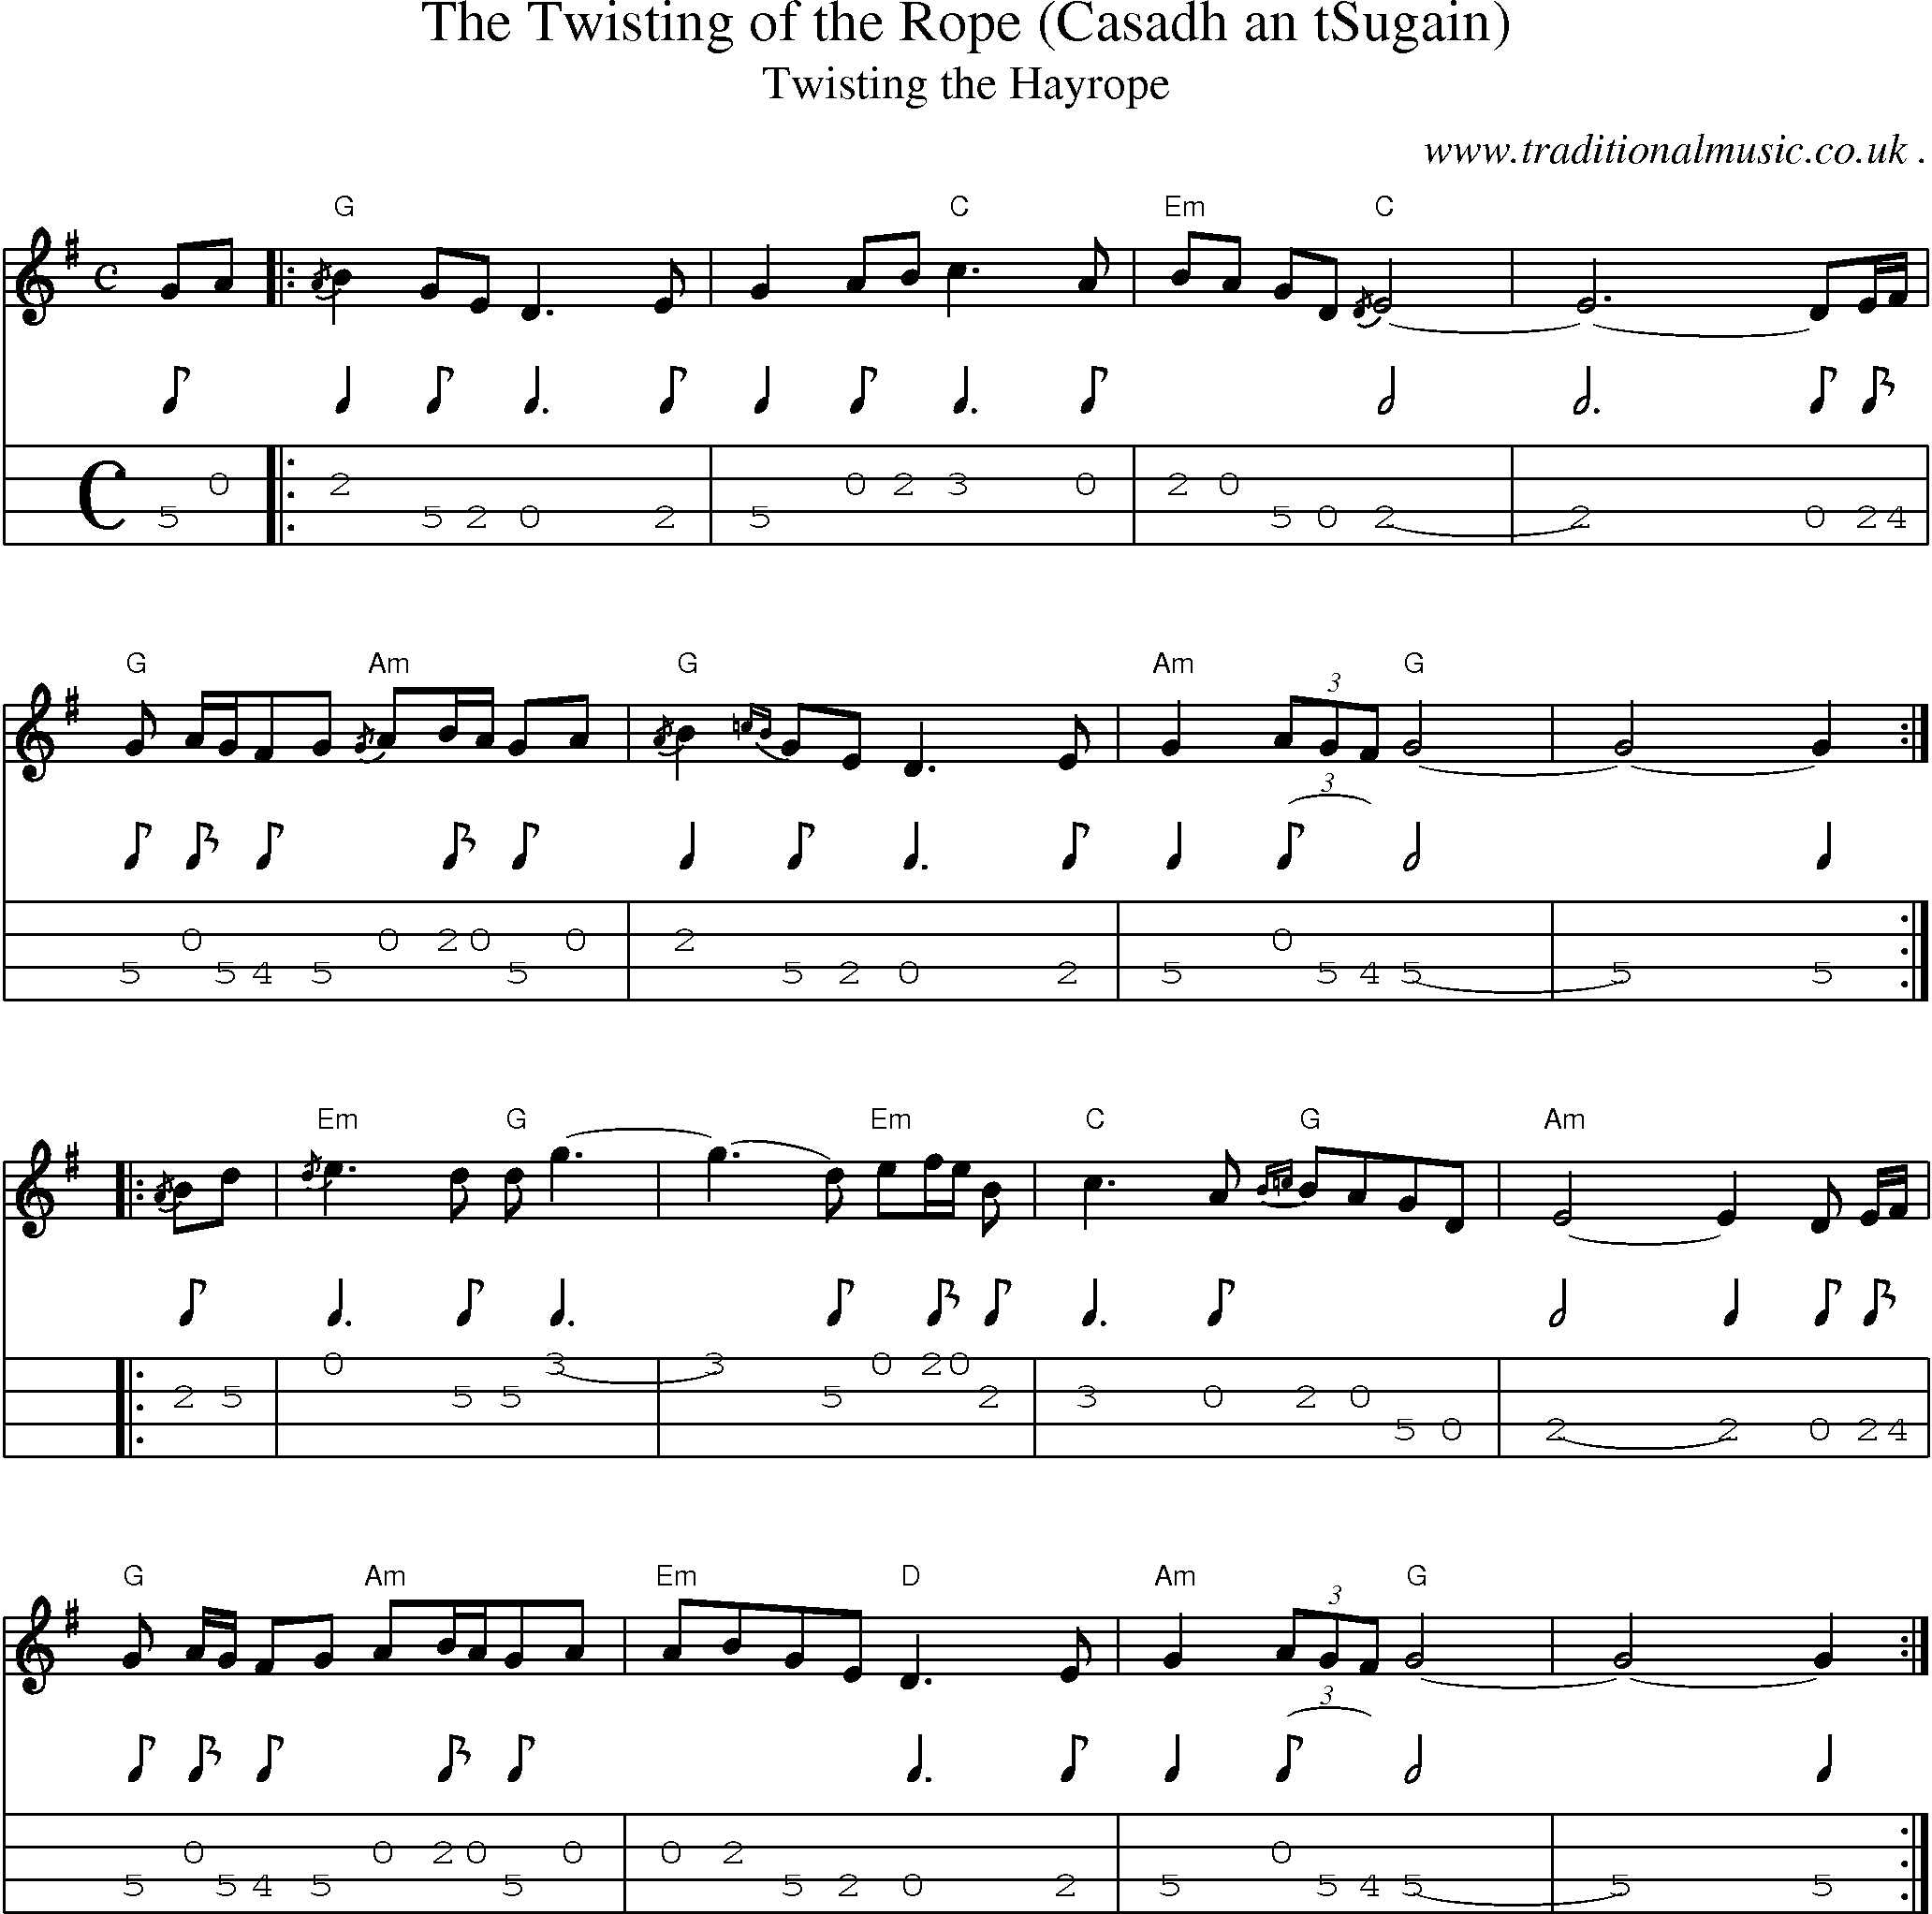 Sheet-music  score, Chords and Mandolin Tabs for The Twisting Of The Rope Casadh An Tsugain